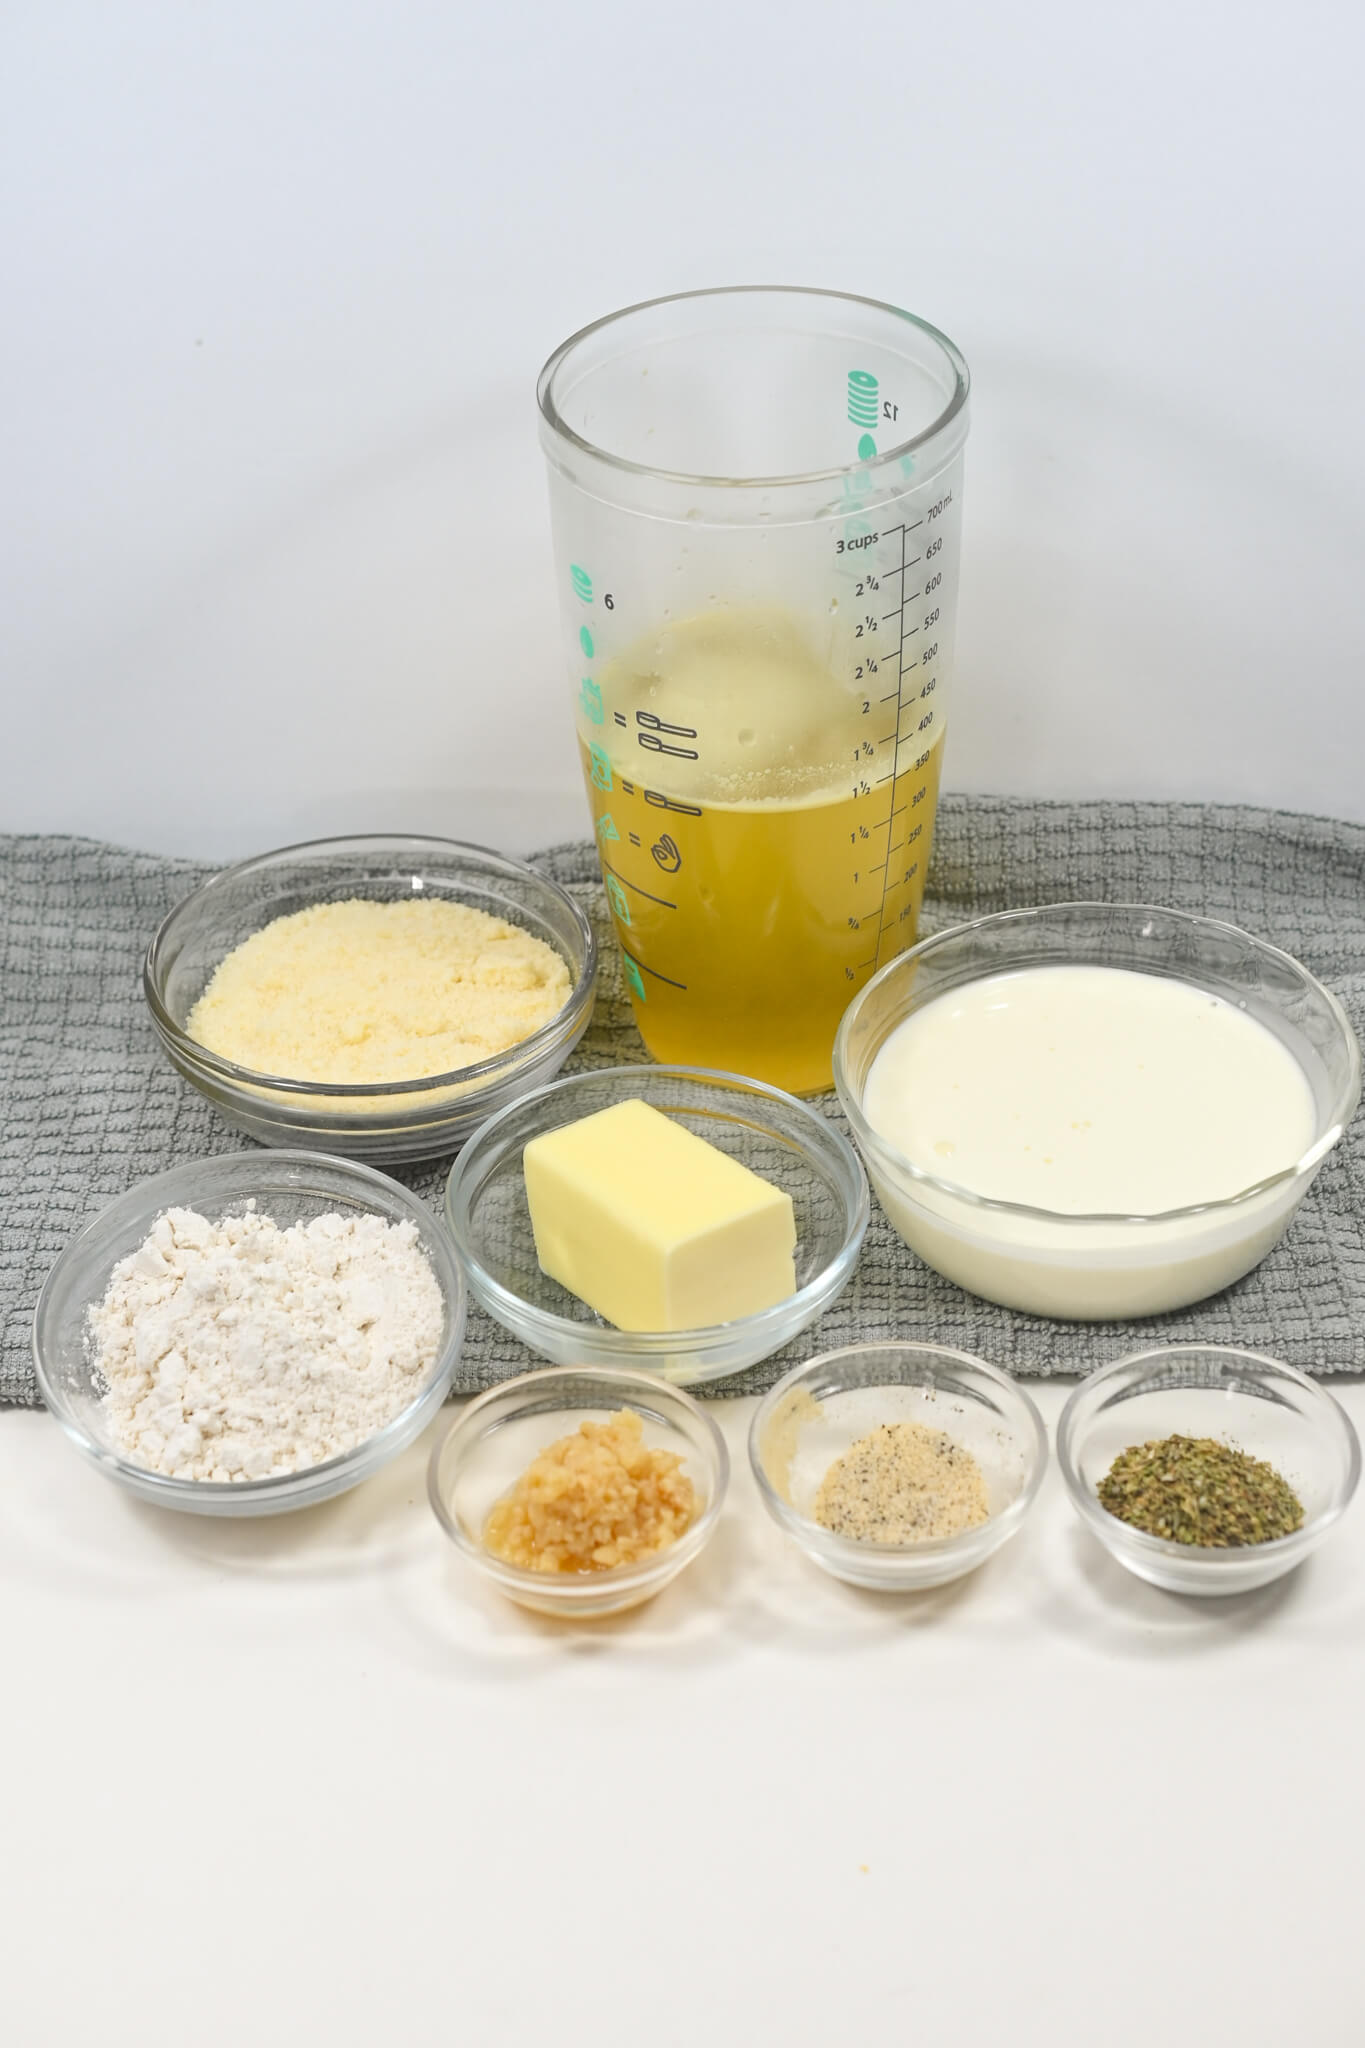 Several ingredients for baking arranged on a table, including flour, butter, garlic parmesan sauce, herbs, and liquids in glass containers.